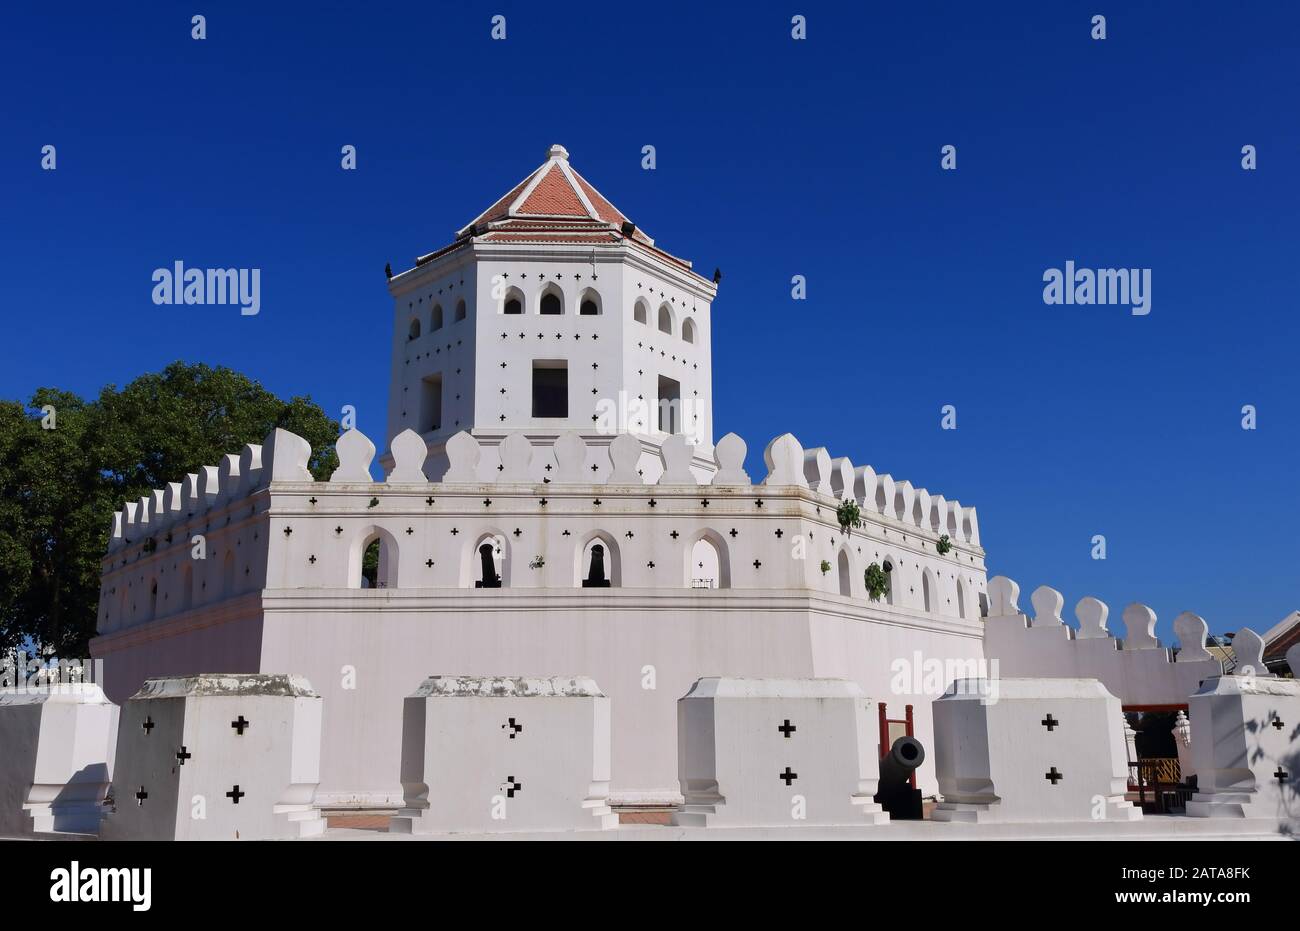 Closeup of Phra Sumen fort in Santi Chai Prakarn public park on riverbank of Chao Phraya river in Bangkok, the fort was built more than 200 years ago Stock Photo